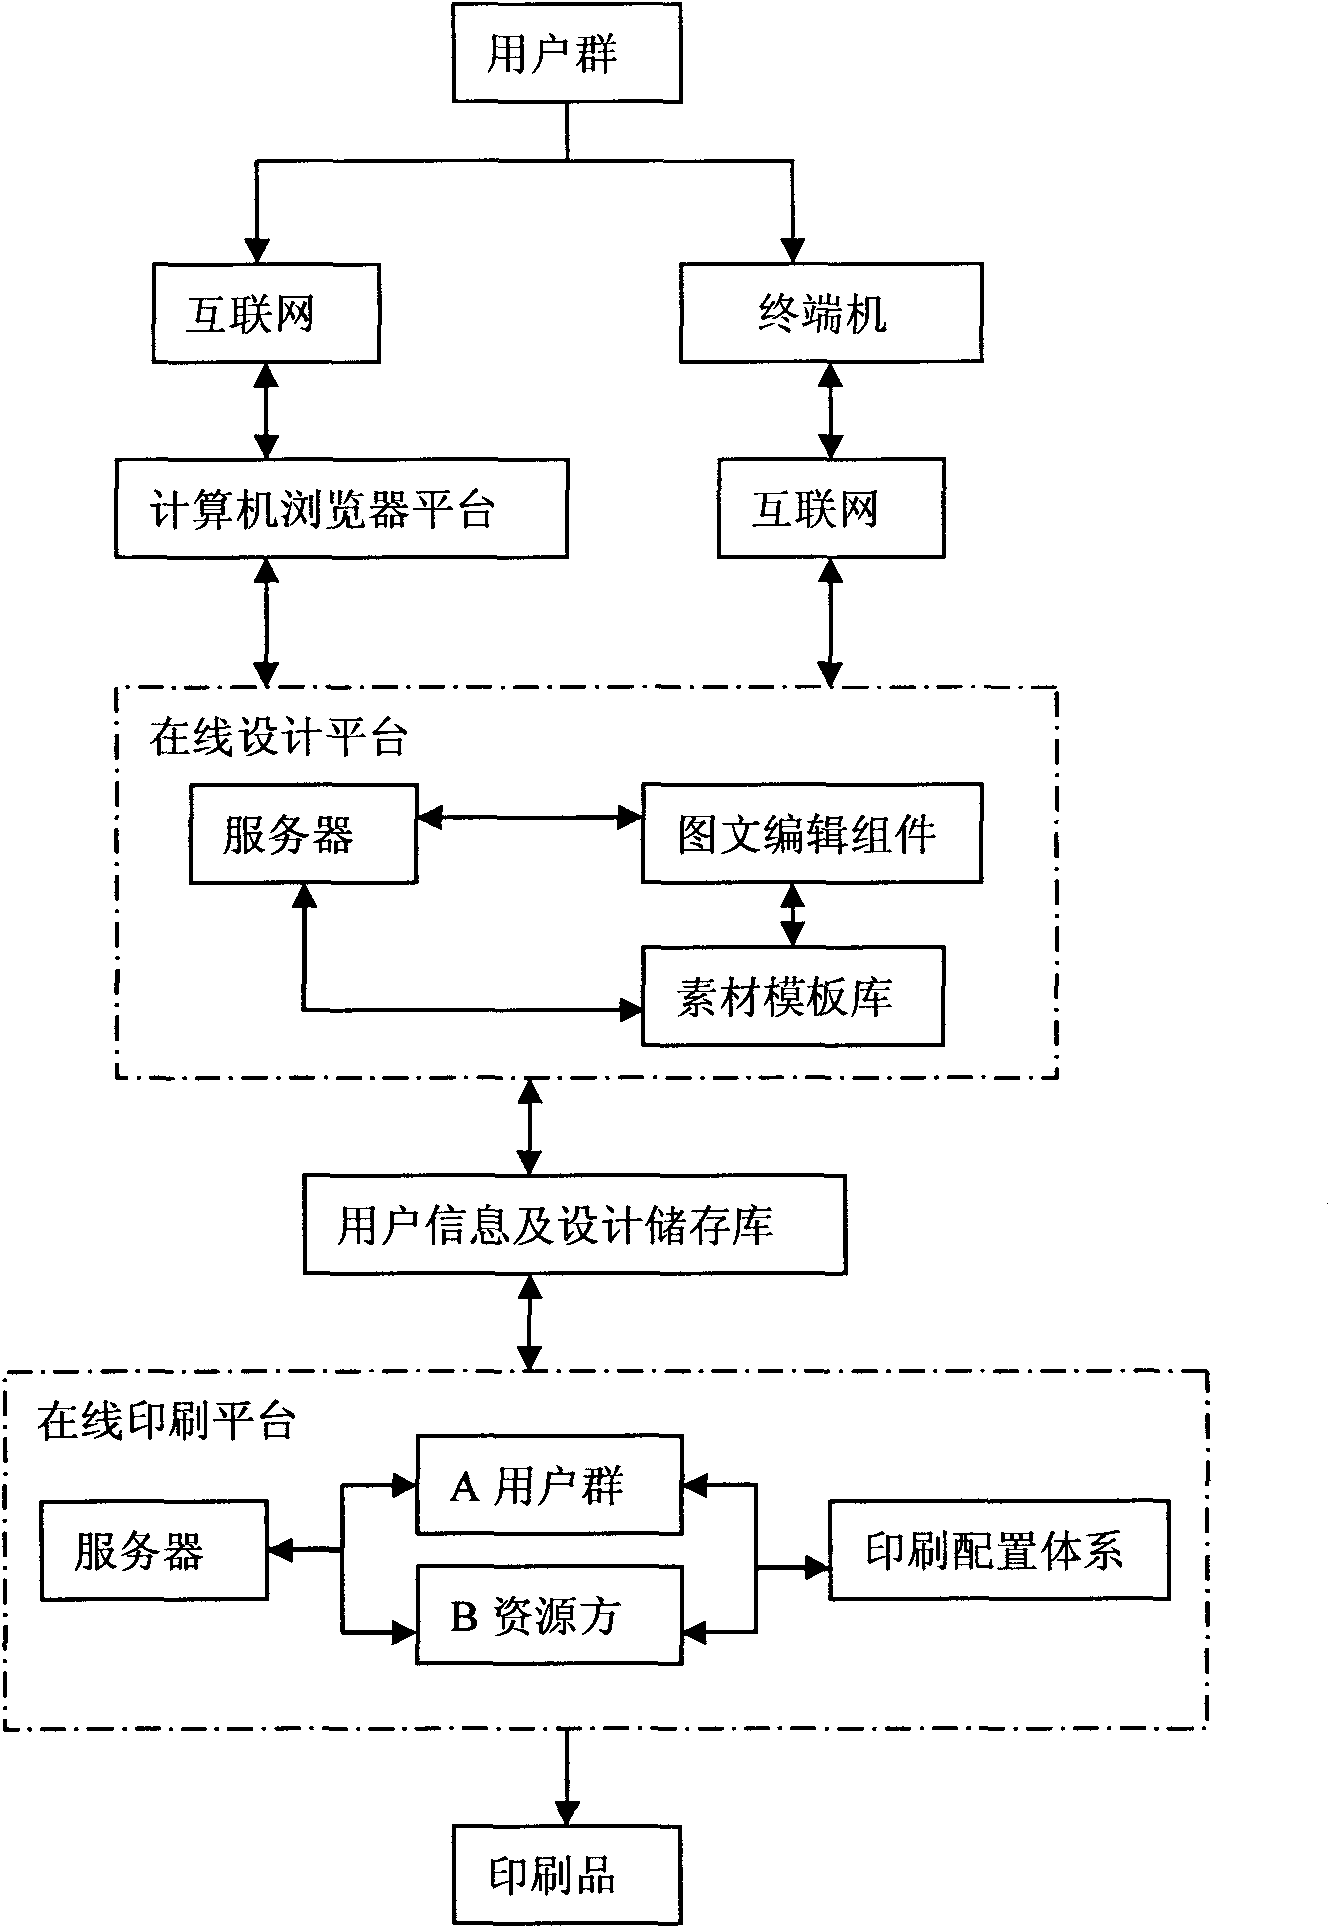 Method and system for integrating online modularized design and printing